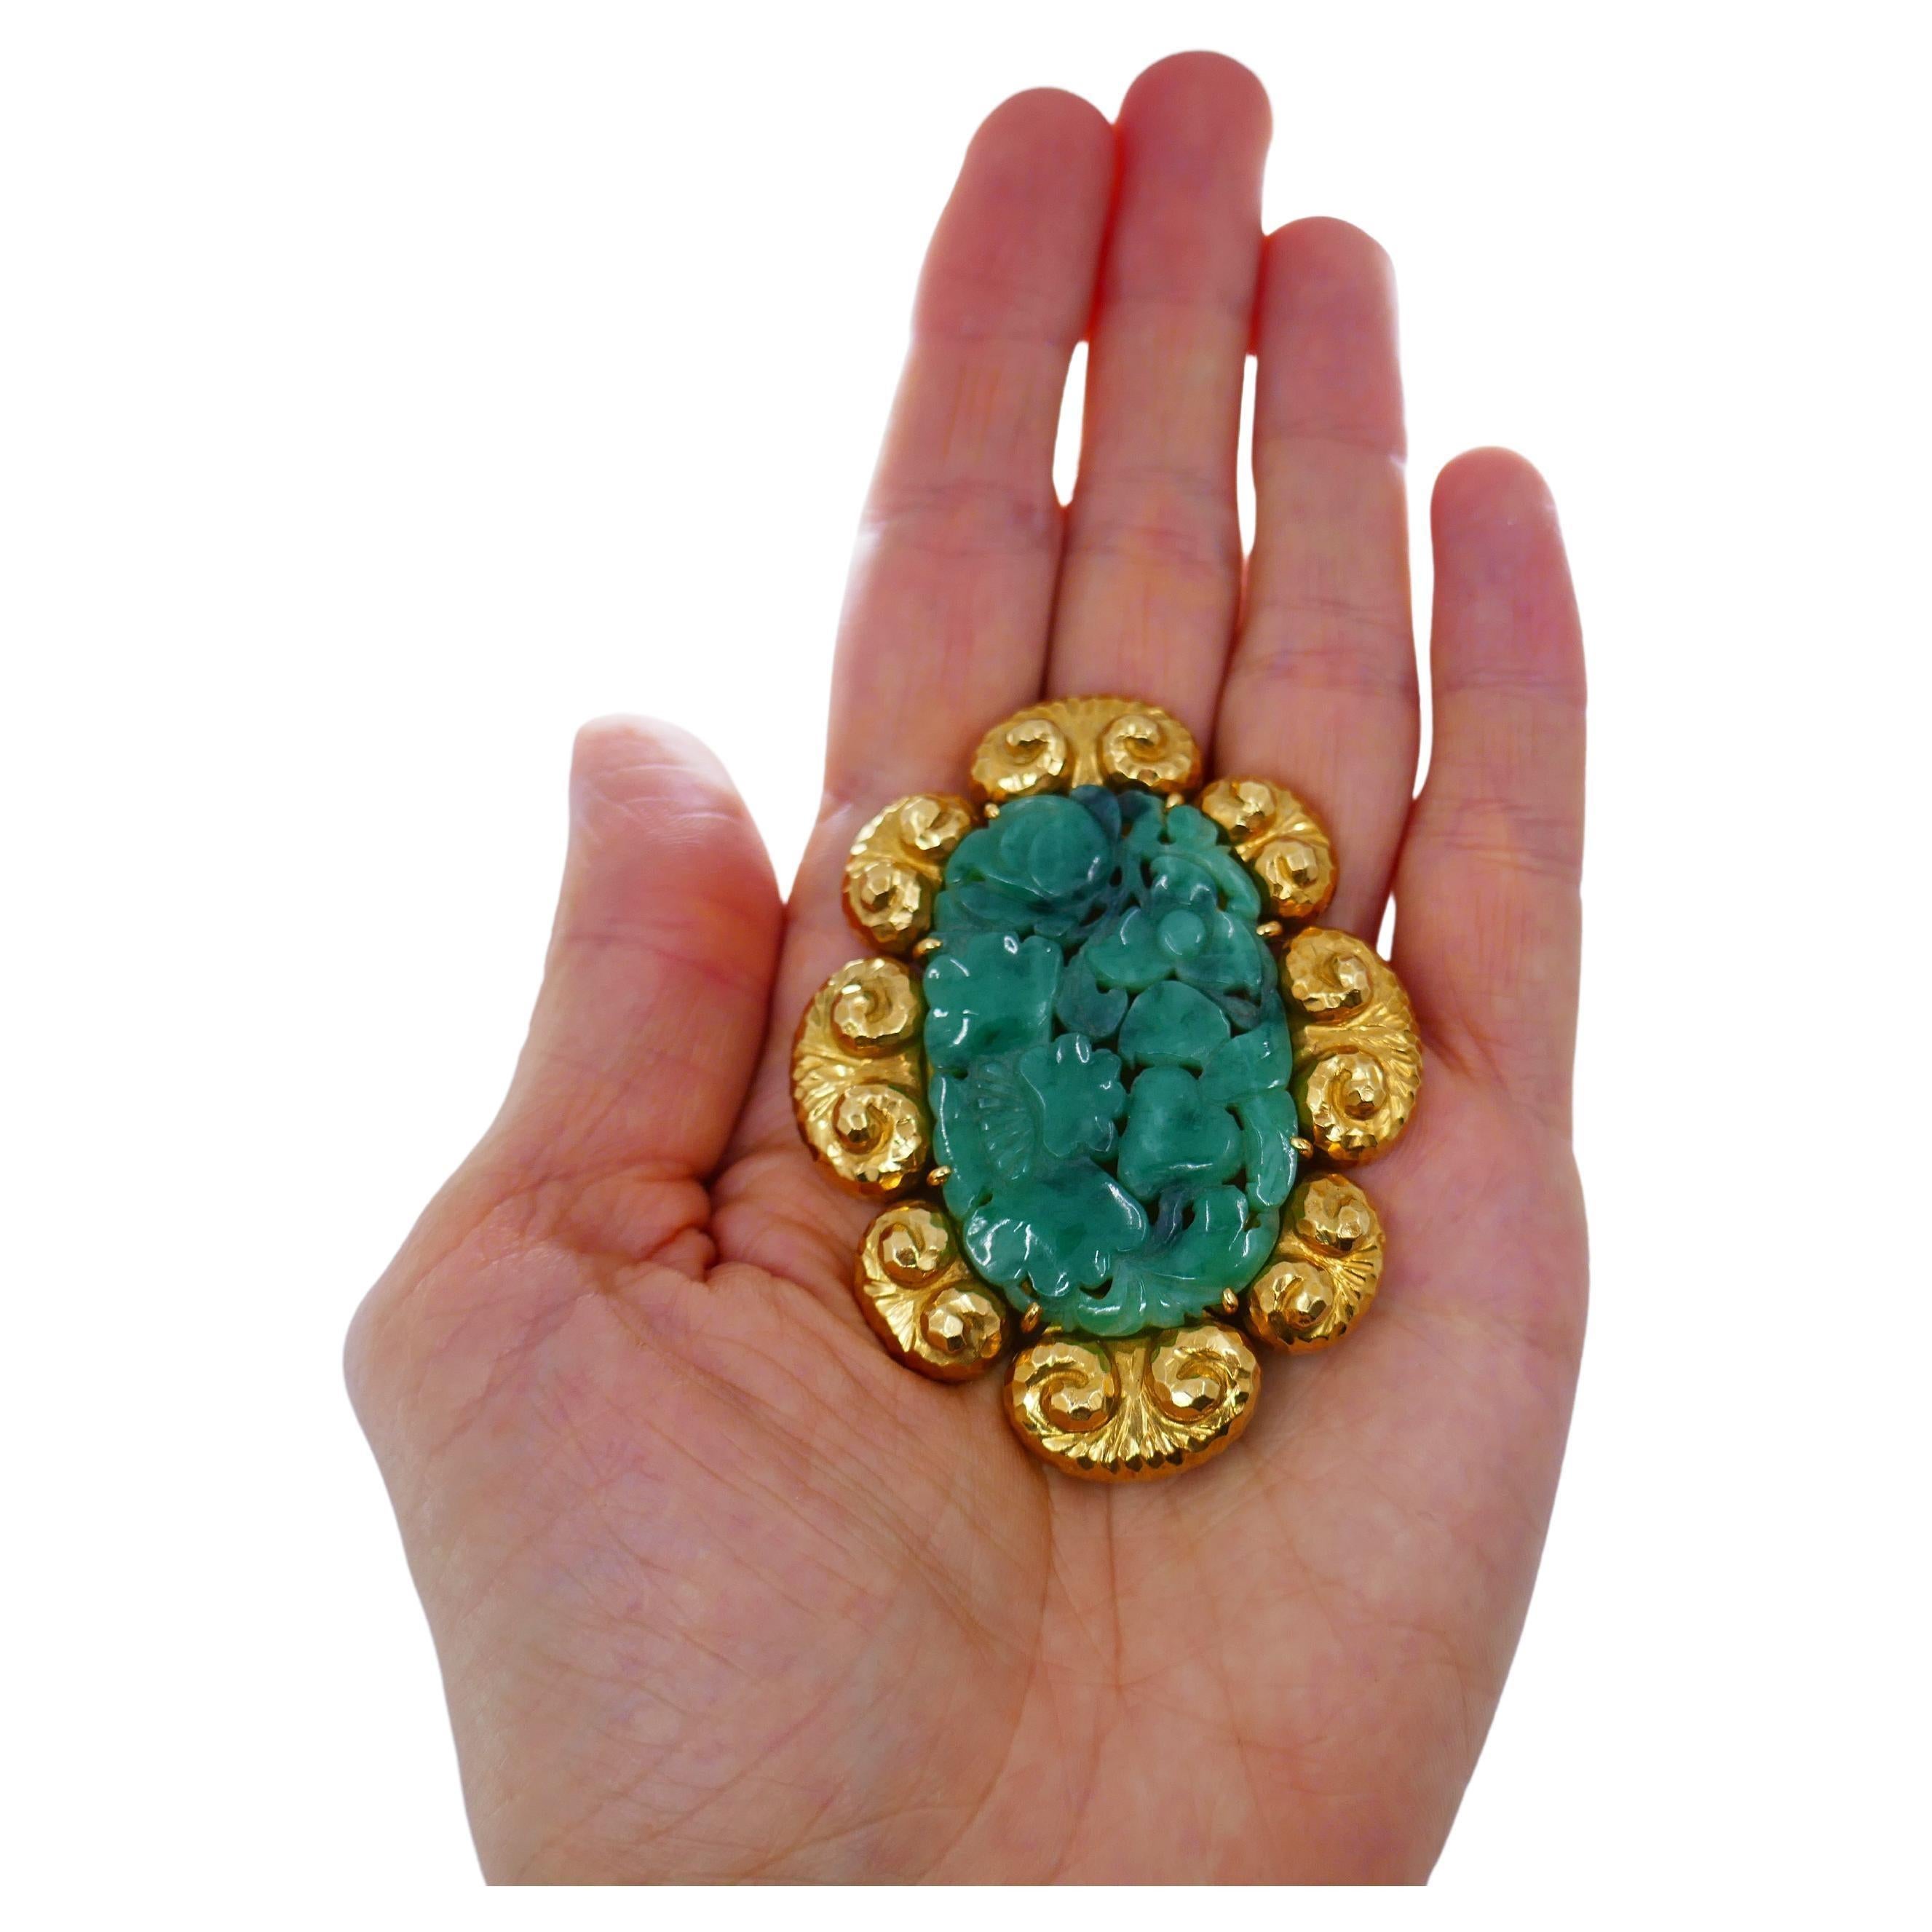 A gorgeous David Webb pendant and brooch, made of carved jade and 18k gold. The floral motif jade is mounted in a hammered gold frame. This substantial piece is a part of Ancient World collection. The pendant is equipped with a double pin clasp and